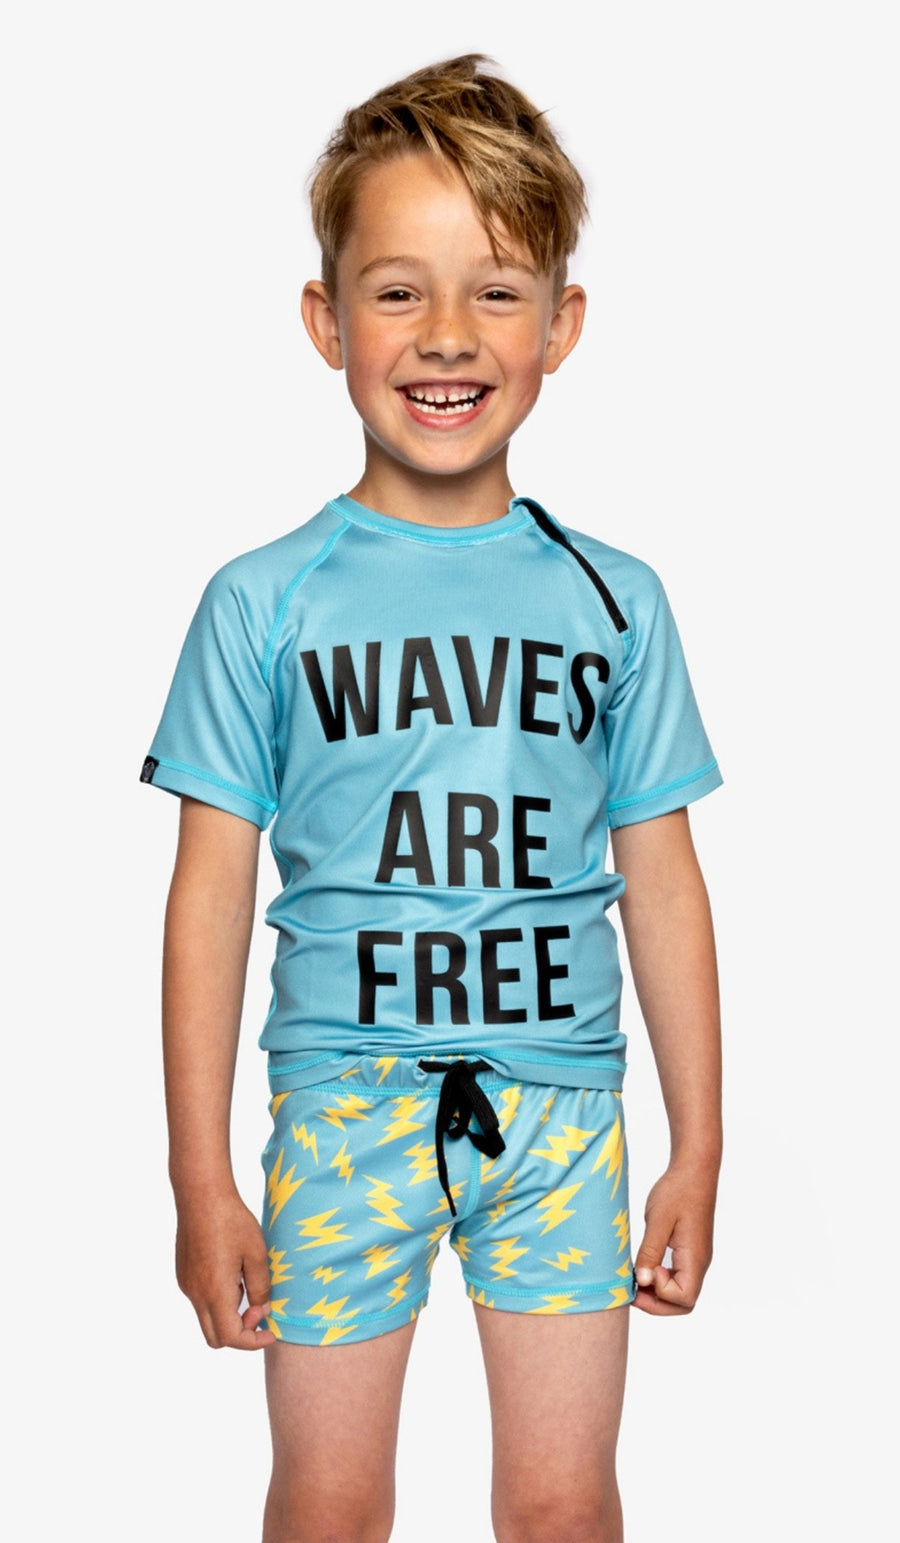 WAVES ARE FREE Tee